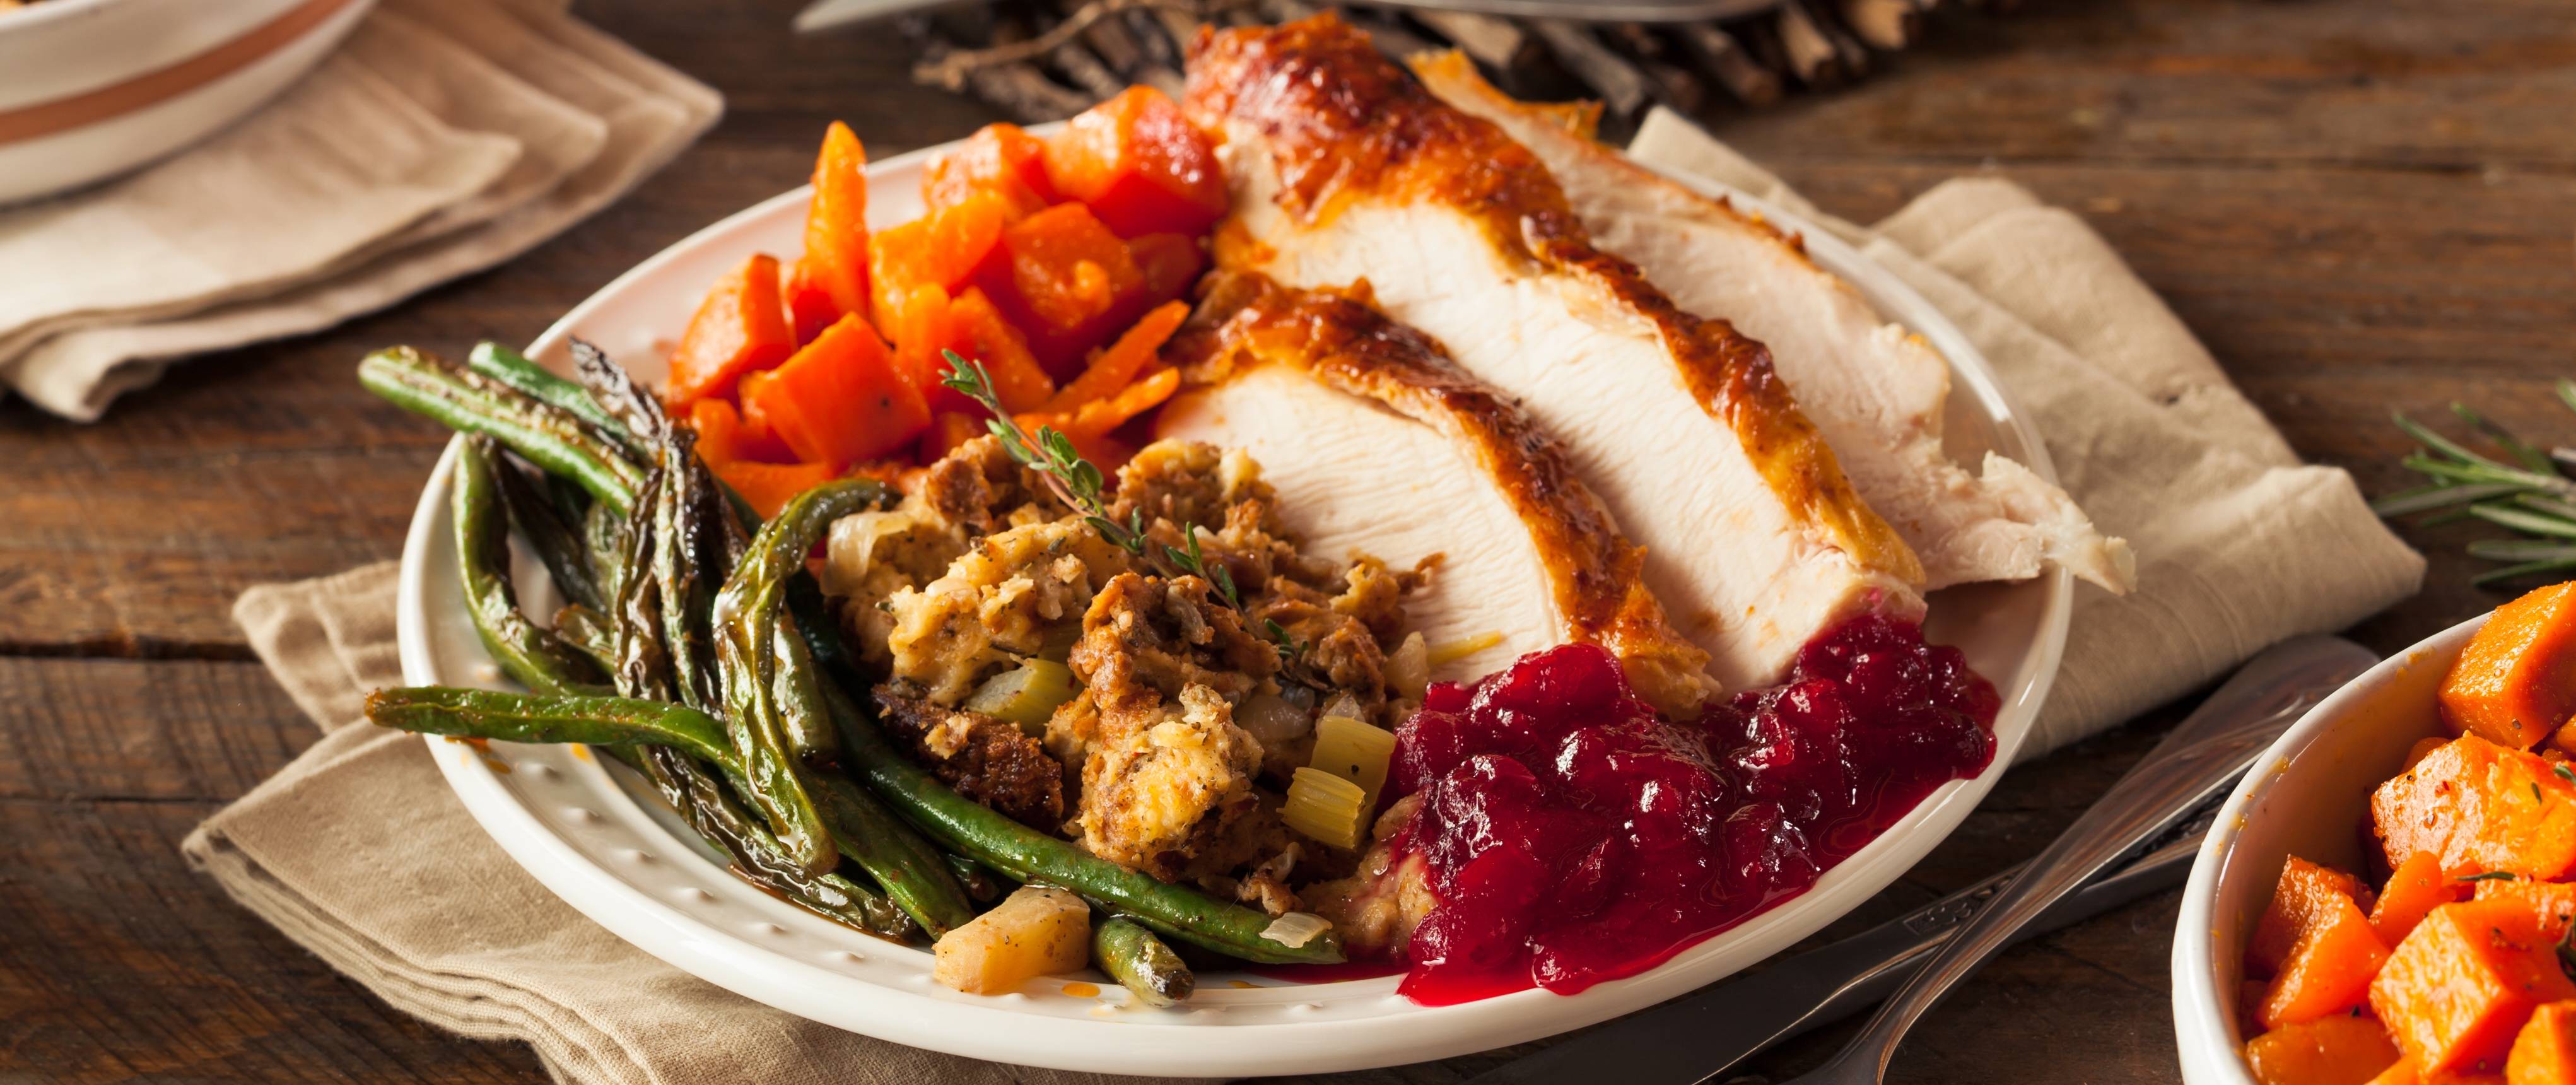 Where To Have Thanksgiving Dinner In Atlanta